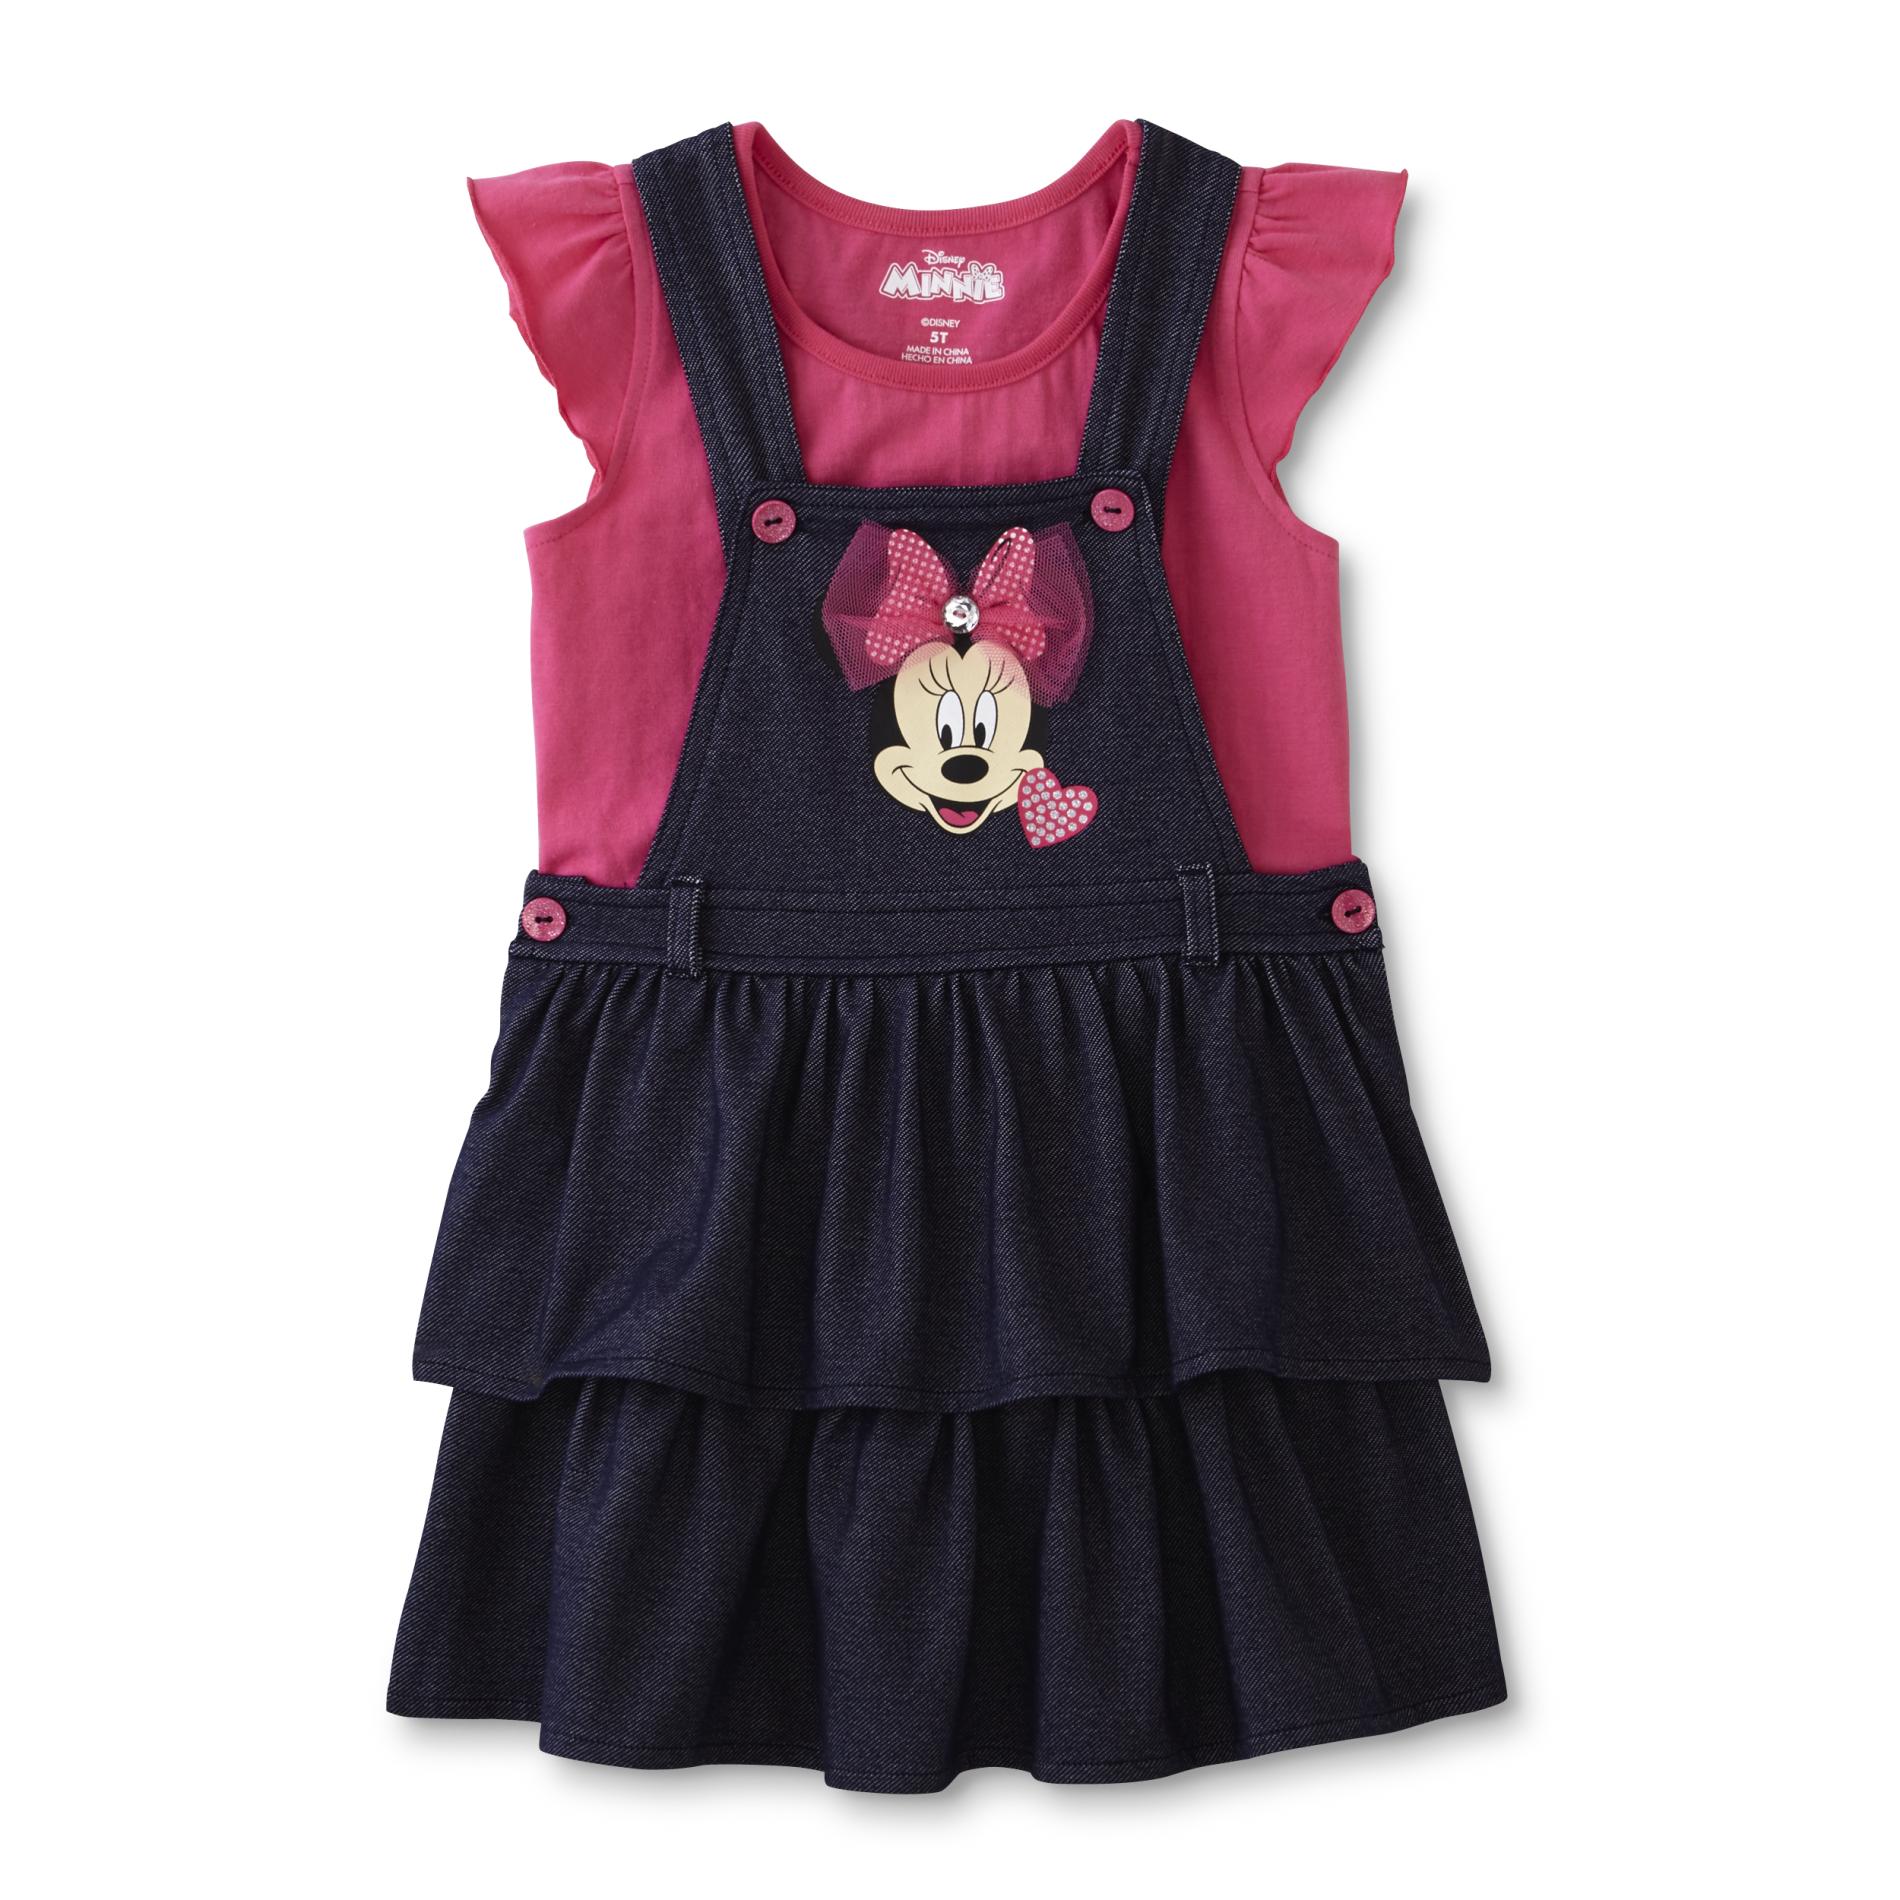 Minnie Mouse Infant & Toddler Girl's Top & Shortalls